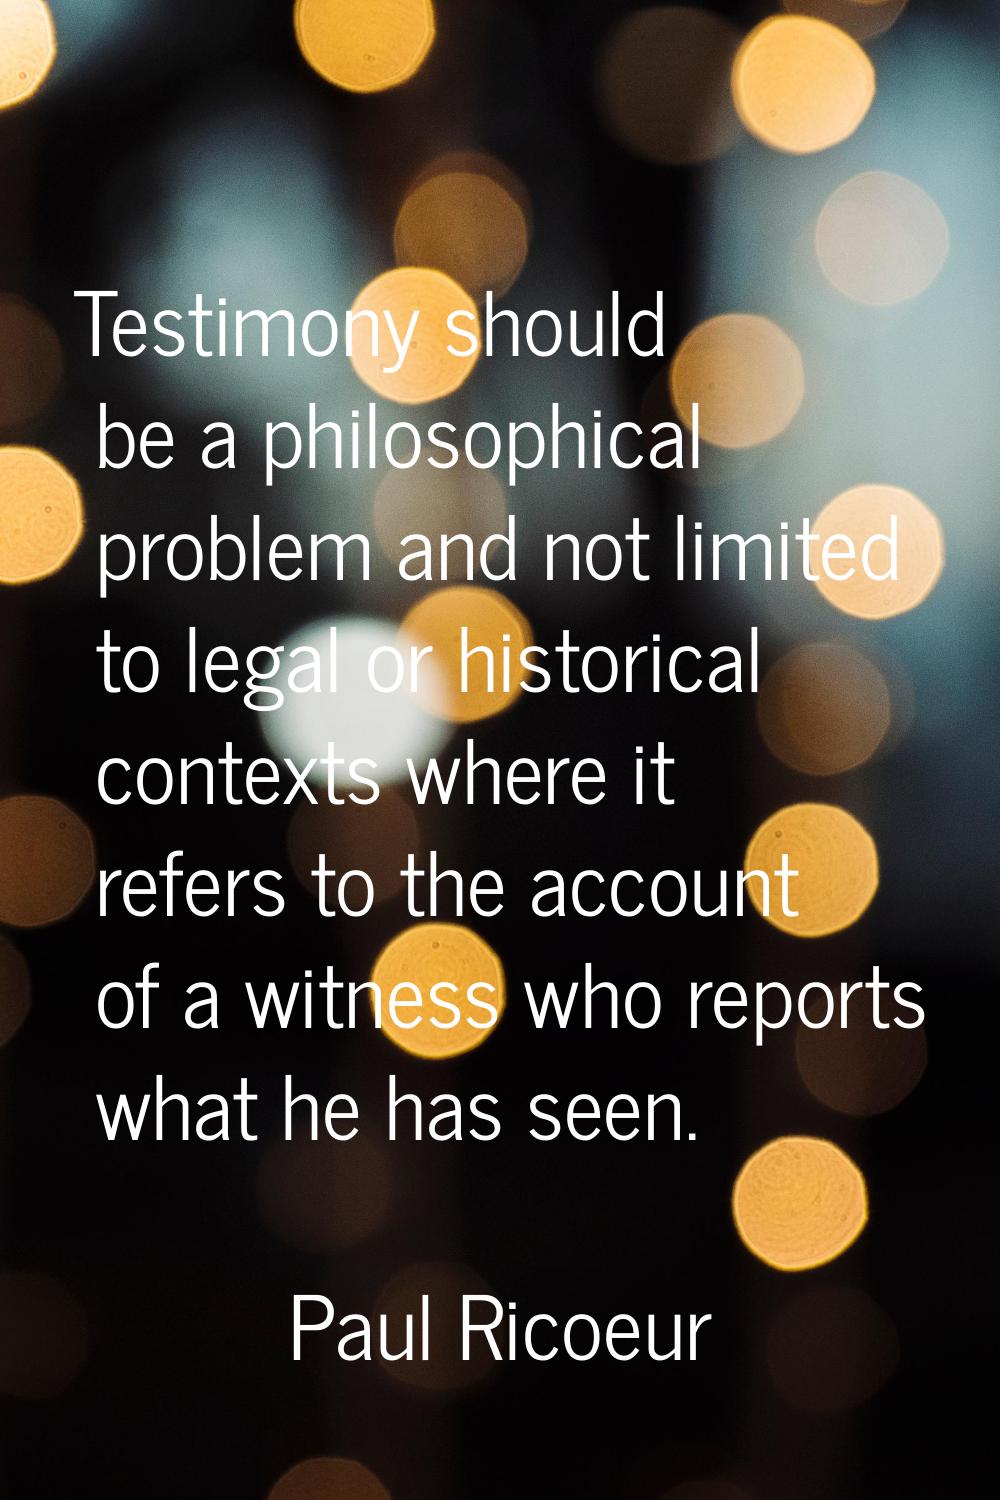 Testimony should be a philosophical problem and not limited to legal or historical contexts where i